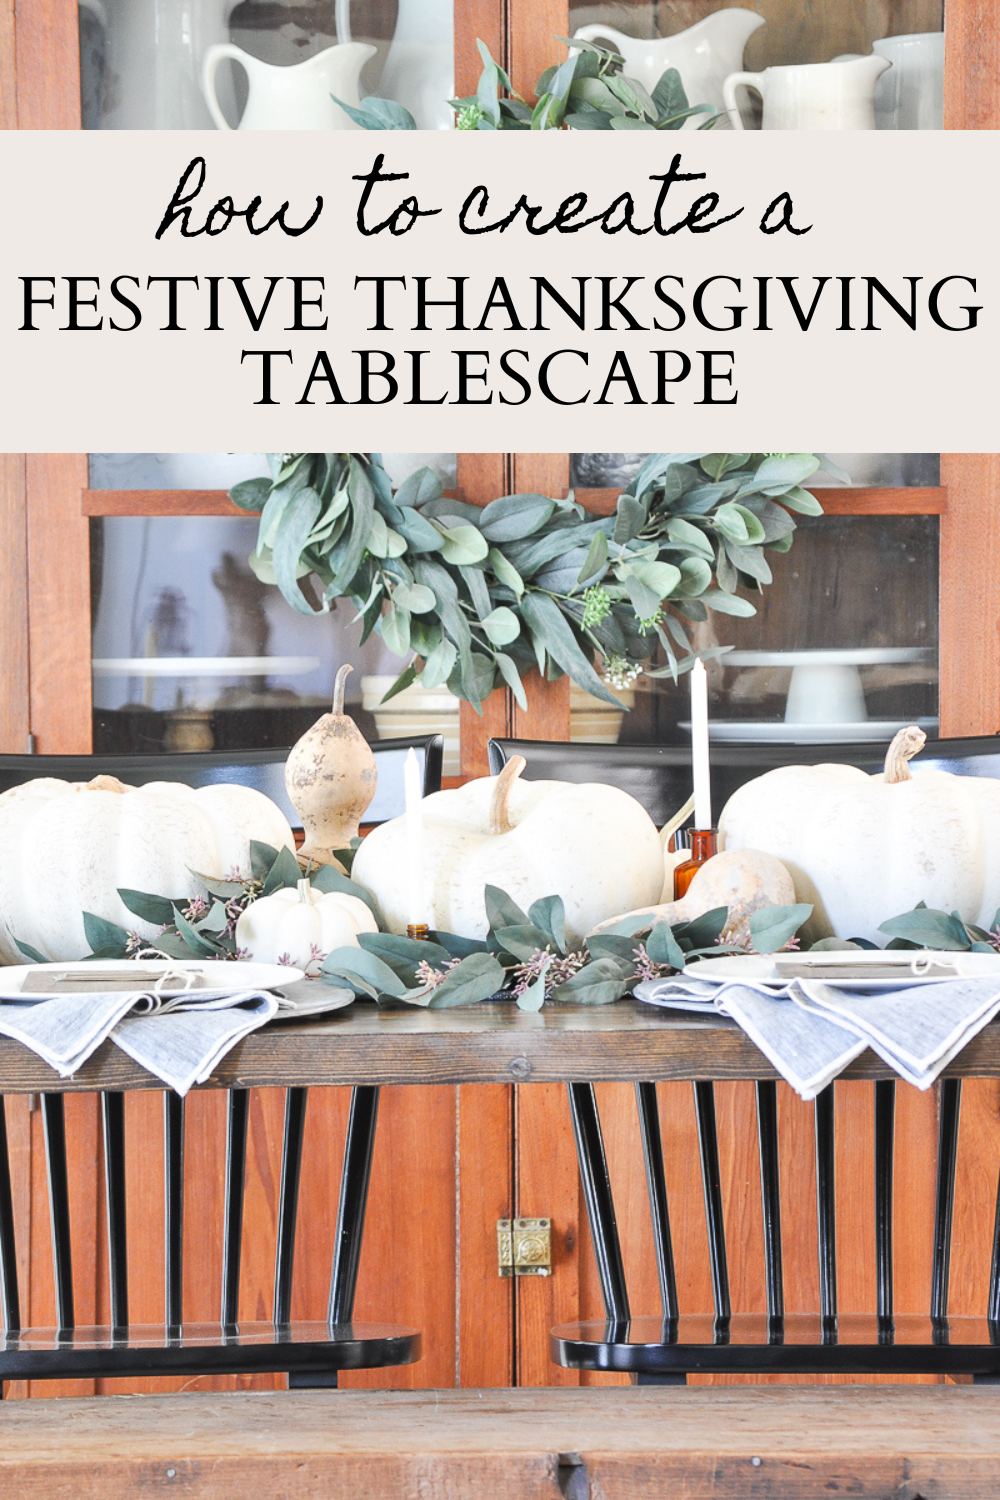 How to Create a Festive Thanksgiving Tablescape